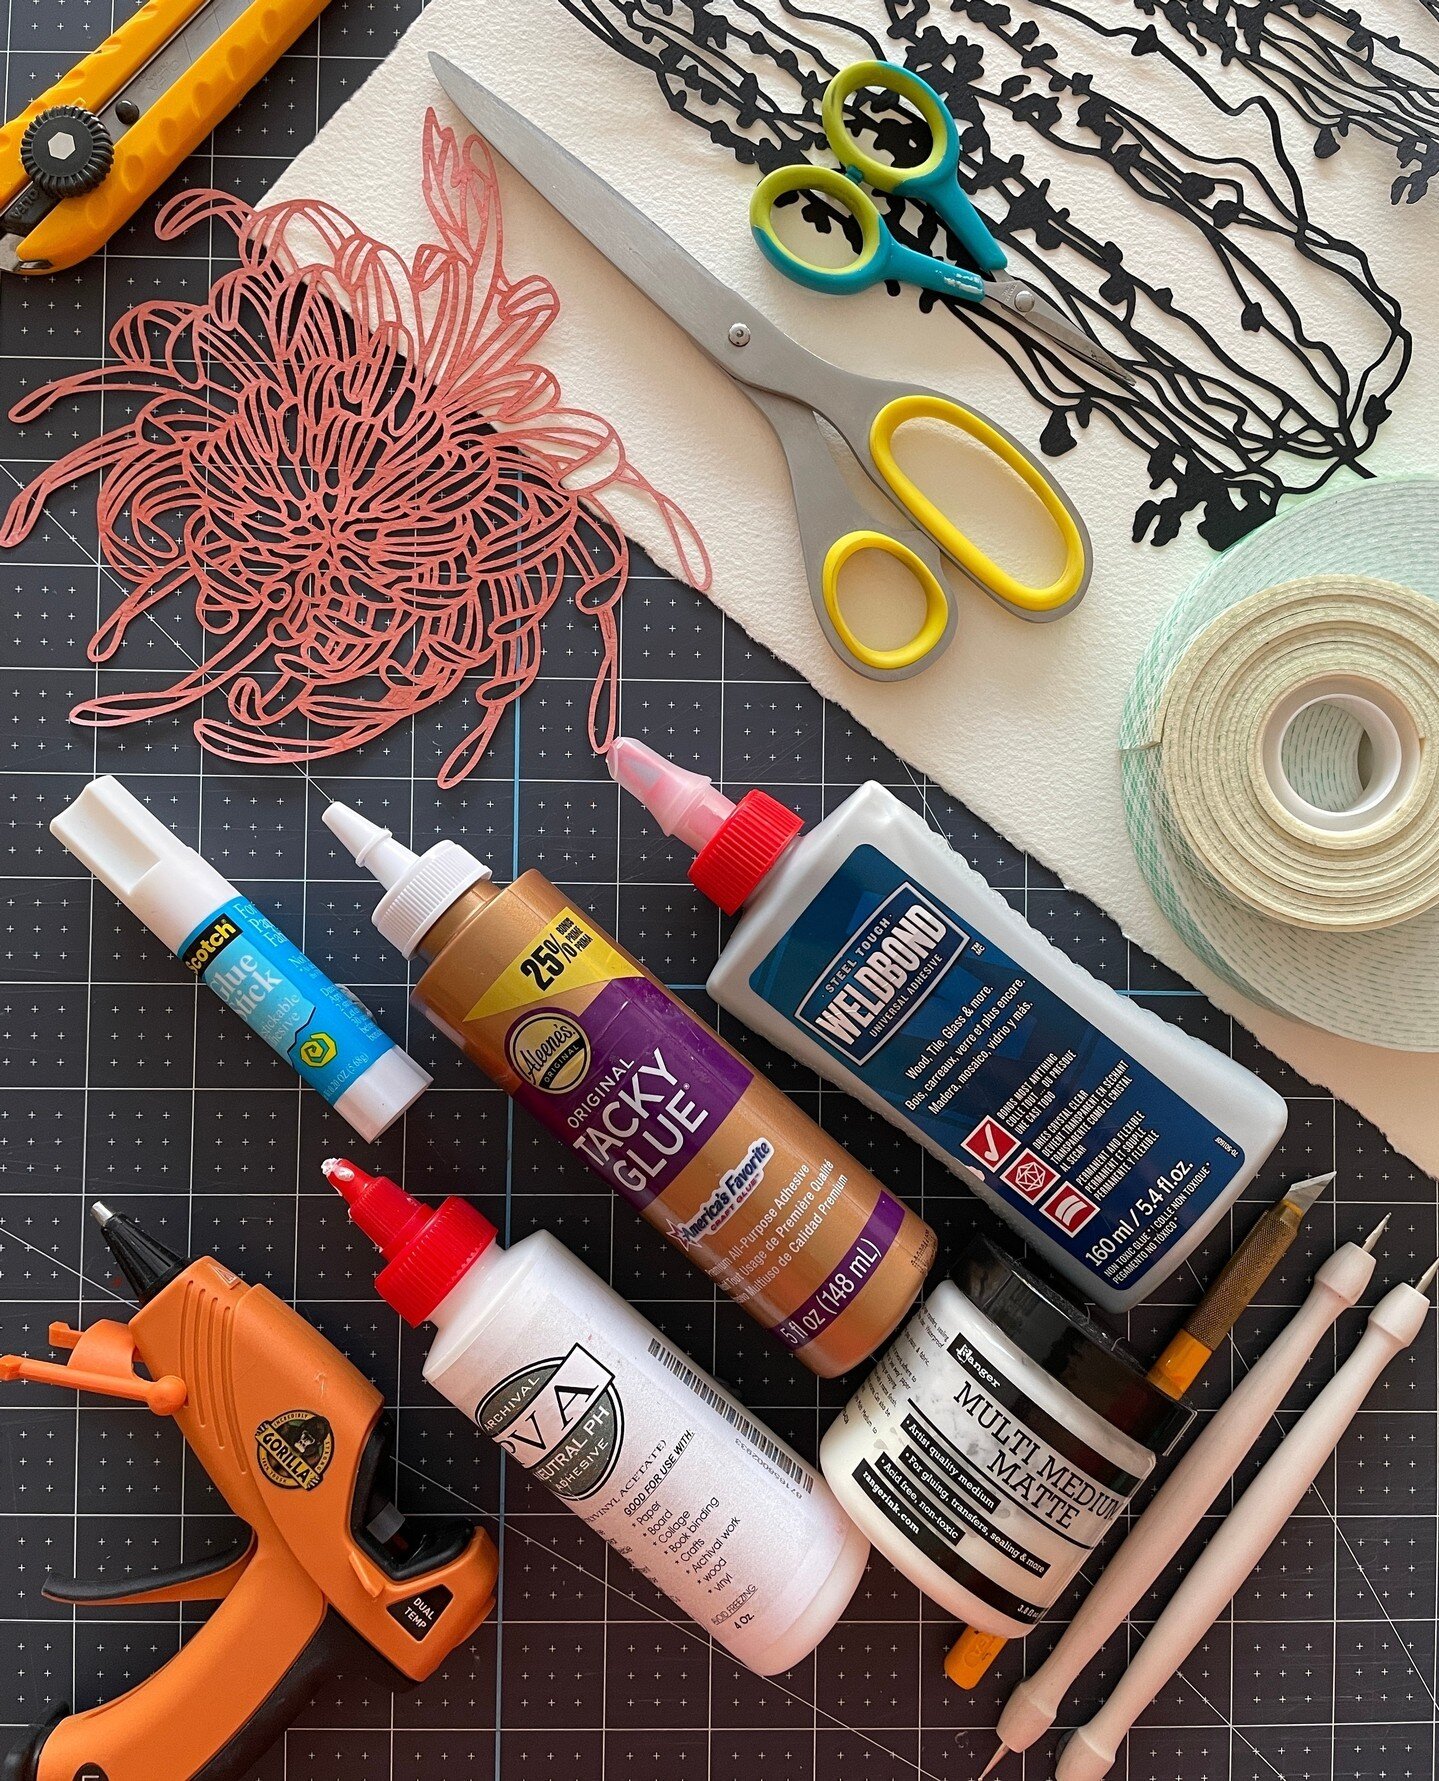 Day 21 of #amonthinpaper : adhesives! ⁠
⁠
I am always trying new adhesives, but my go to is either Tacky Glue or Weldbond. Both are low in moisture, which prevents paper from buckling. I use paper weights afterwards. I've also tried normal PVA glue a